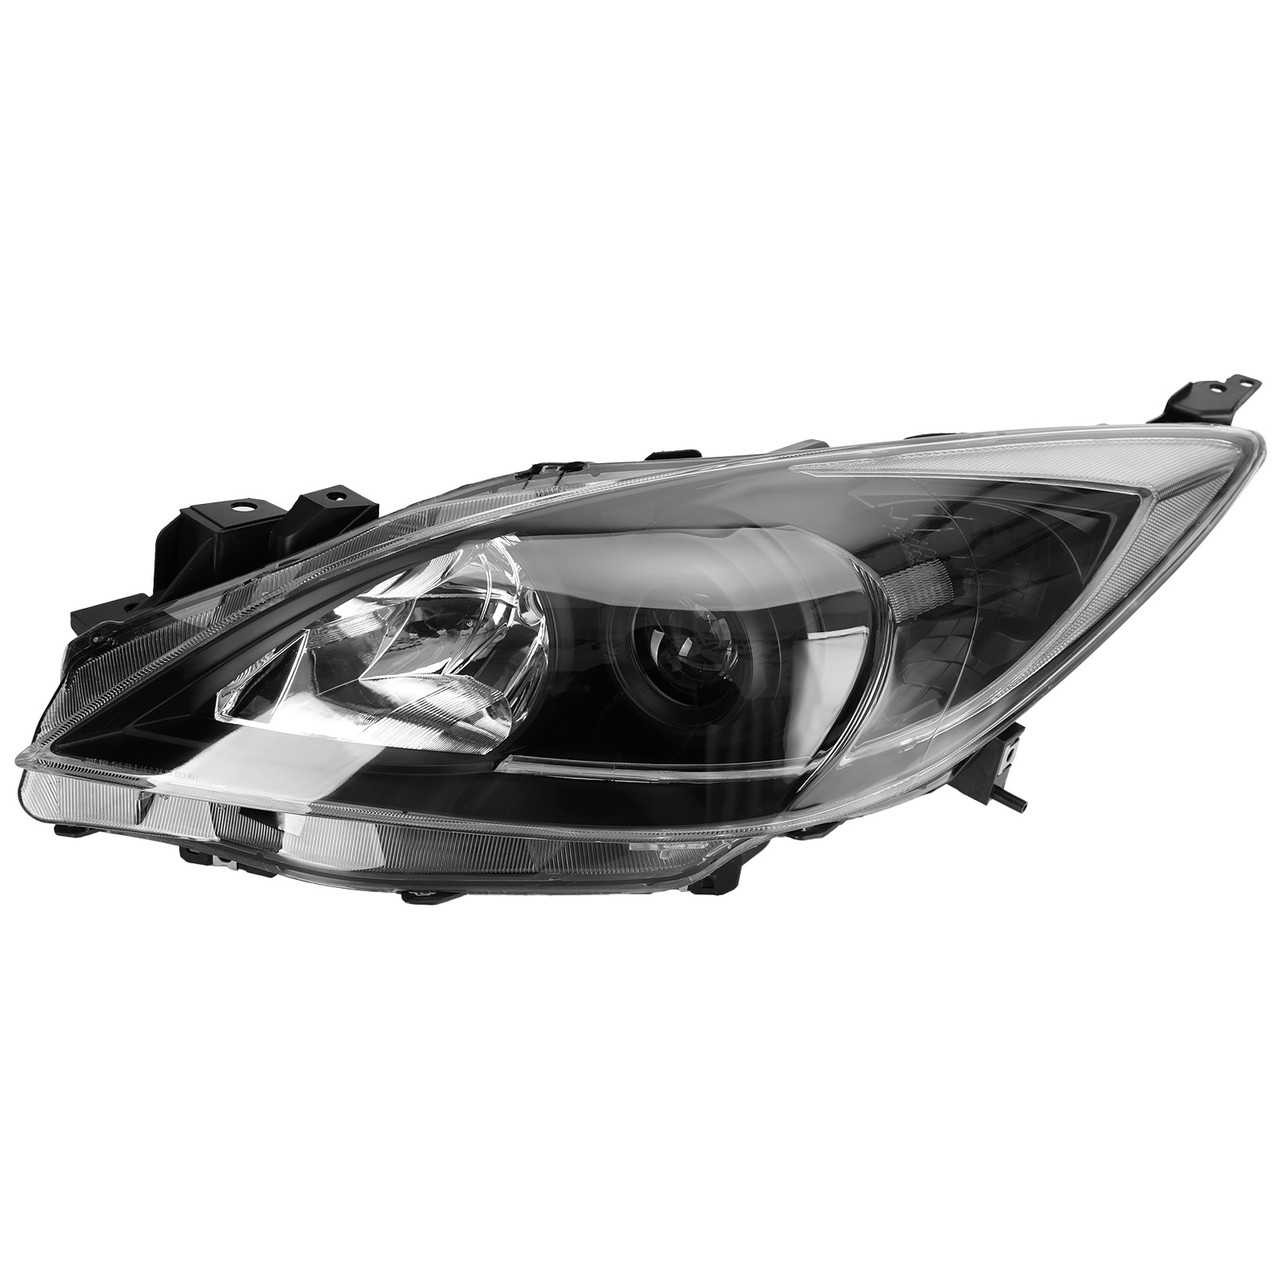 Black Housing Clear Side Headlights/Lamp Assembly For Mazda 3 2010-2013